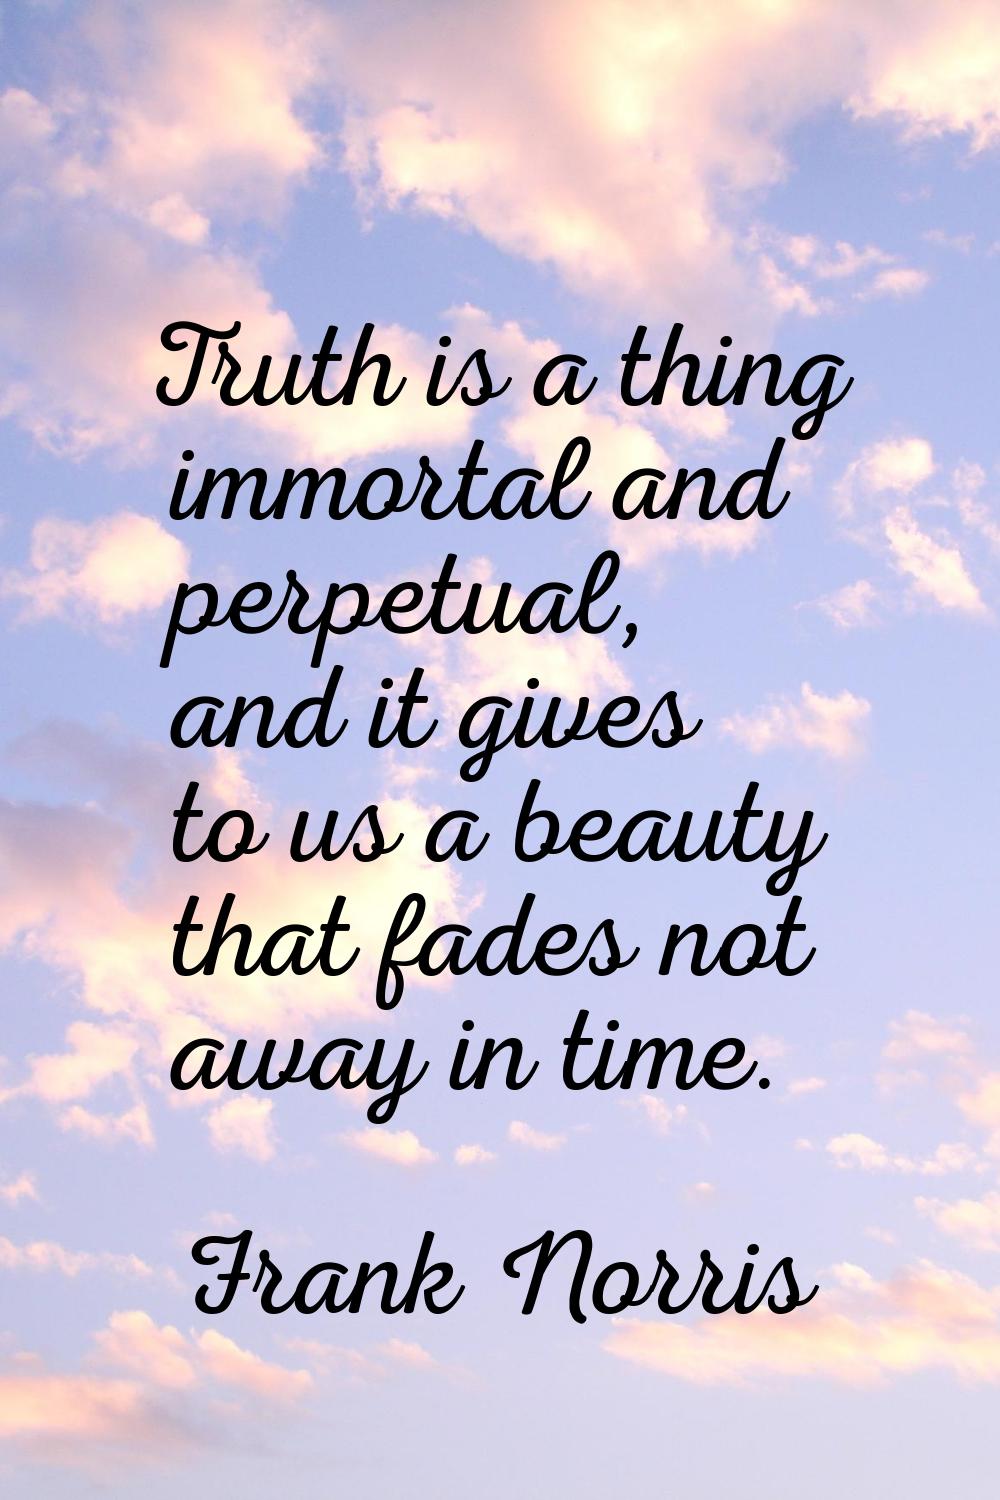 Truth is a thing immortal and perpetual, and it gives to us a beauty that fades not away in time.